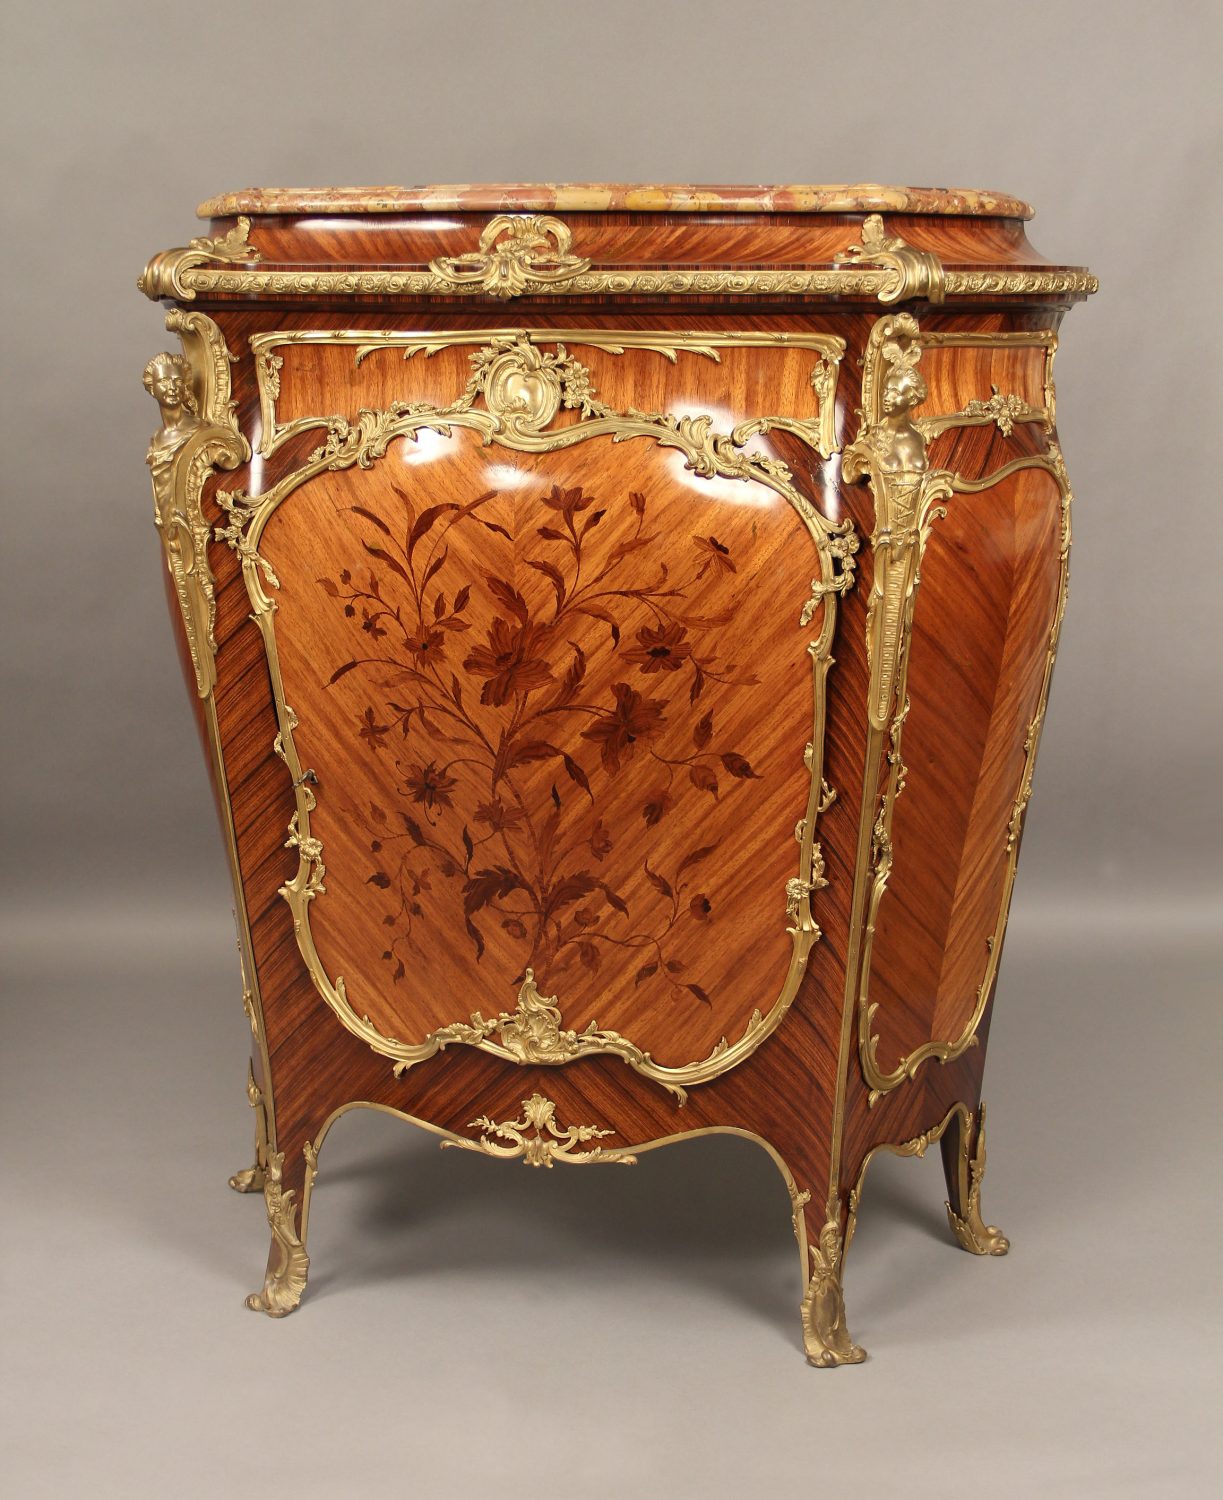 19th Century Antique Bronze Mounted Marquetry Kingwood Cabinet with Marble Top by Joseph Zwiener